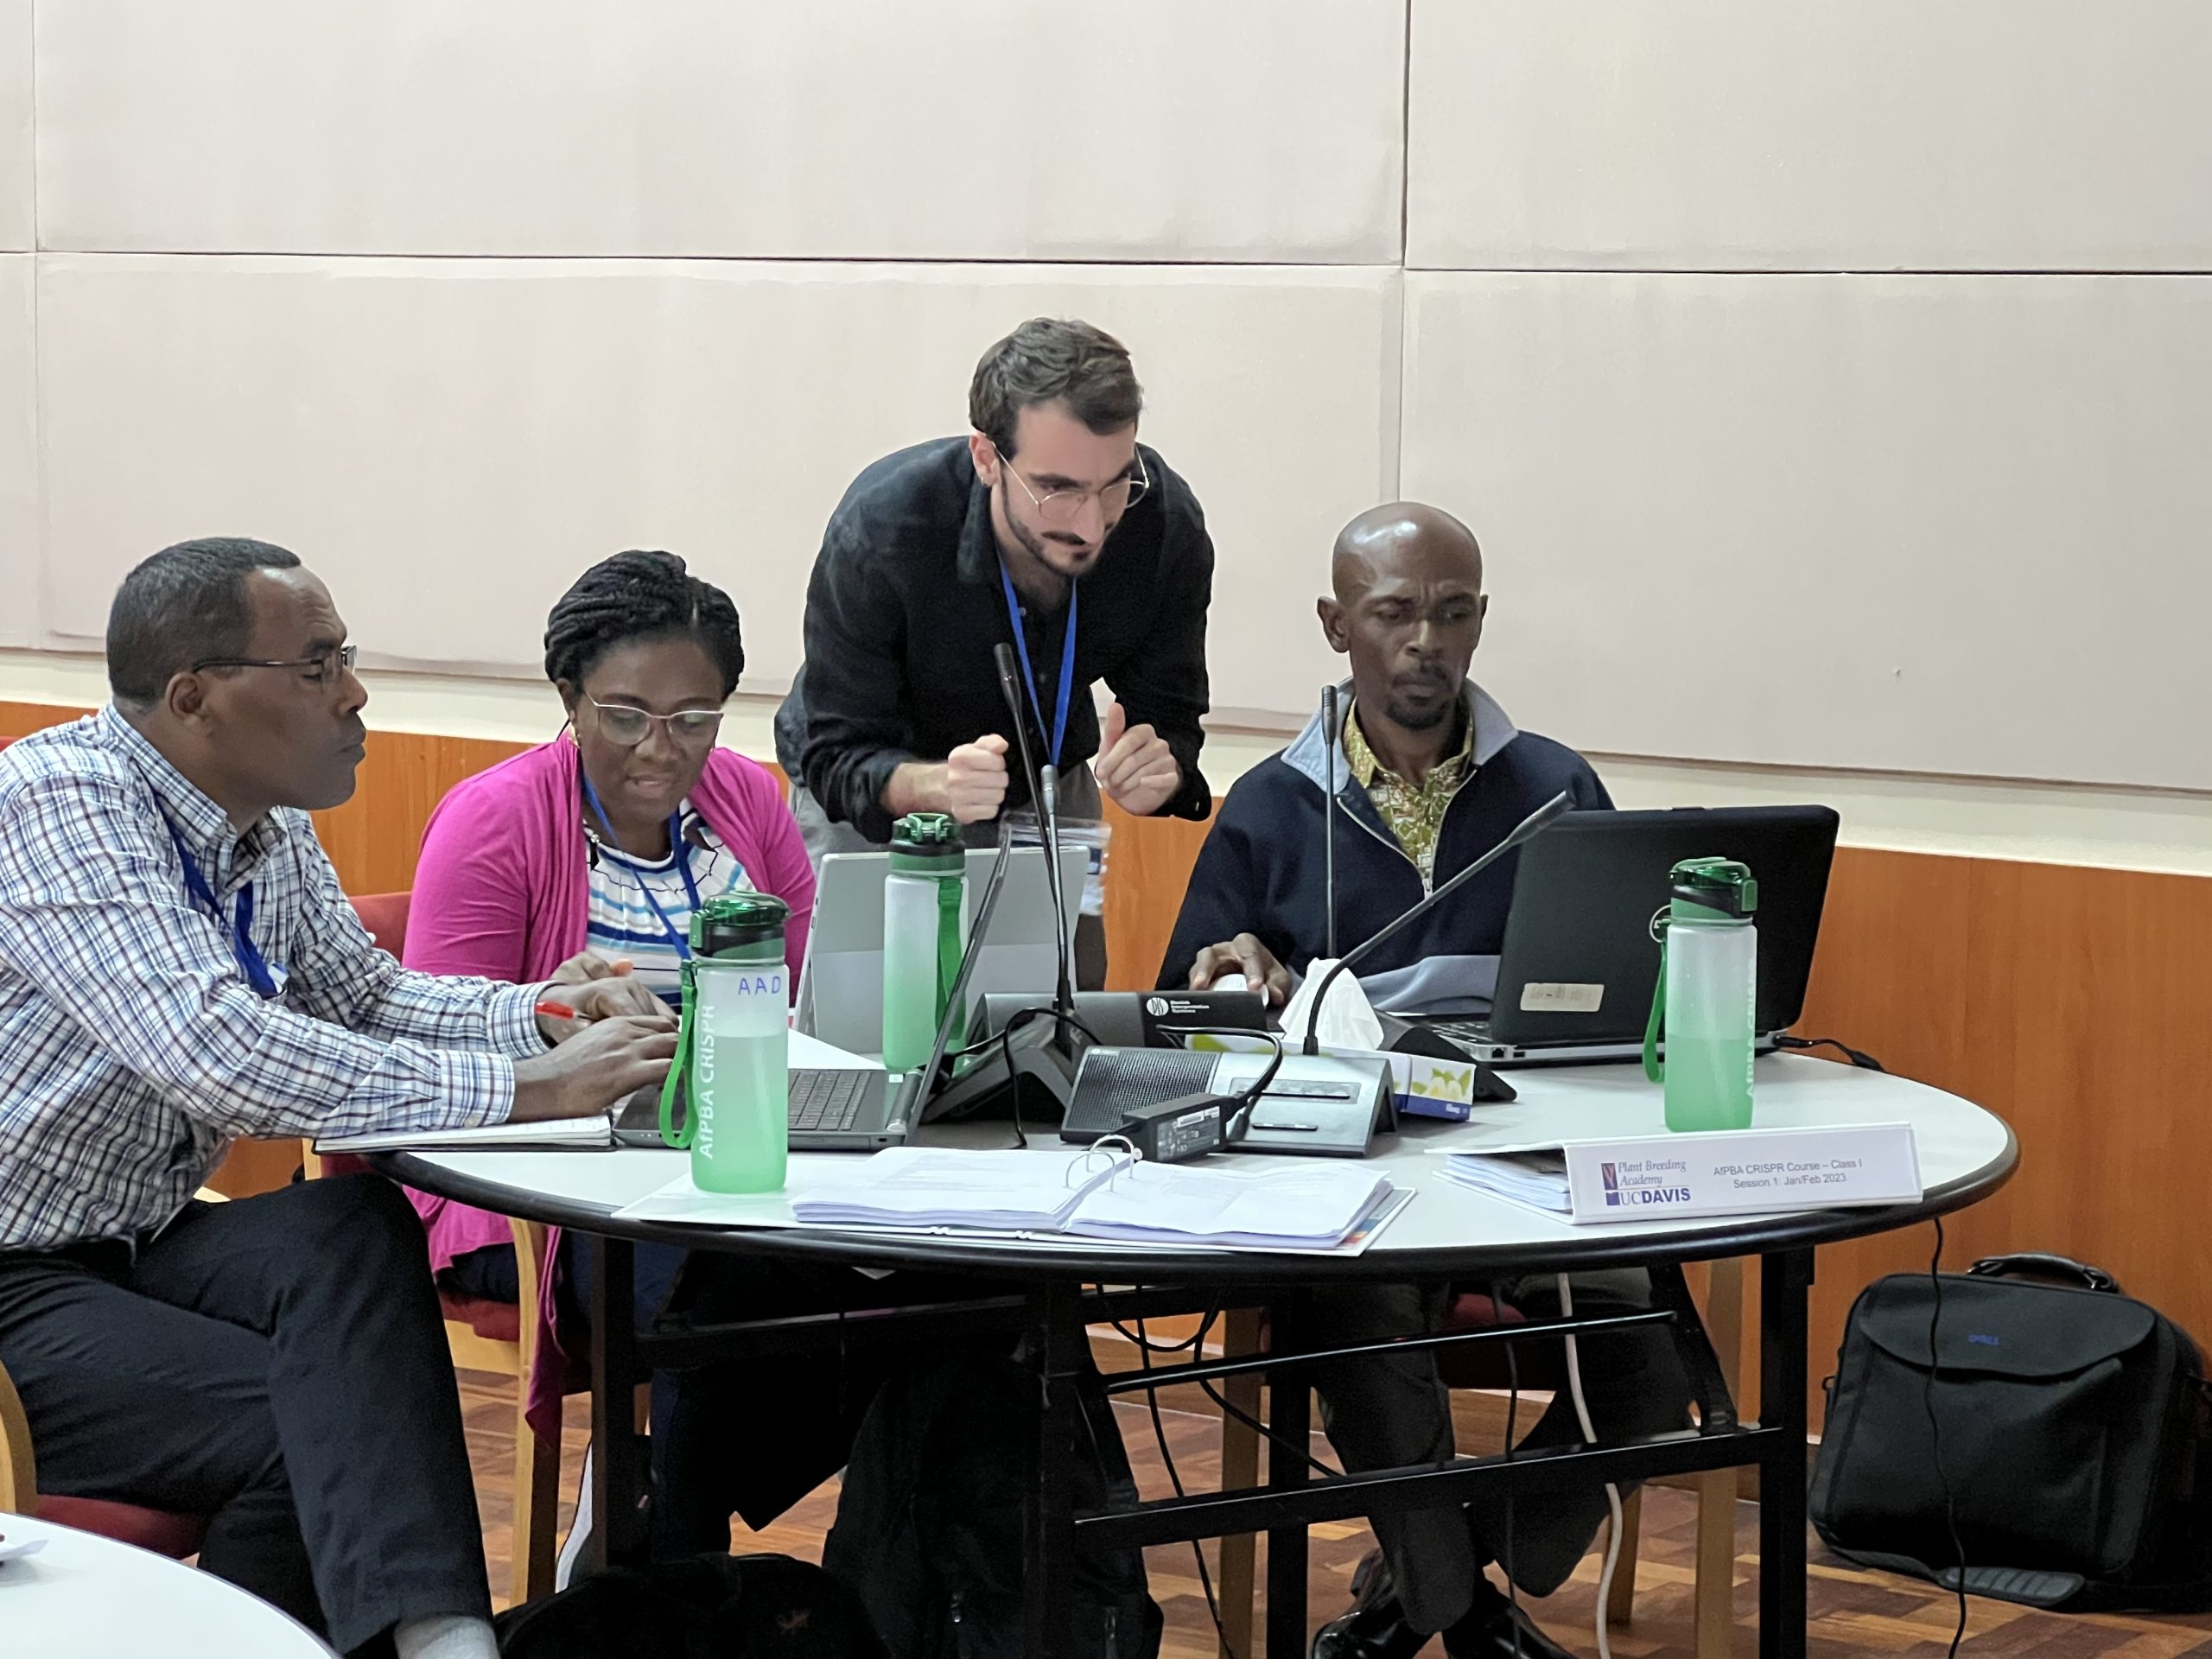 Researchers at table discussing CRISPR. From left to right: Allo Aman Dido, Bio and Emerging Technology Institute Ethiopia; Pamela Akin-Idowu, National Horticultural Research Institute, Nigeria. IGI's Nicholas Karavolias; Andrew Sarkodie Appiah, Biotechnology and Nuclear Agriculture Research Institute, Ghana.